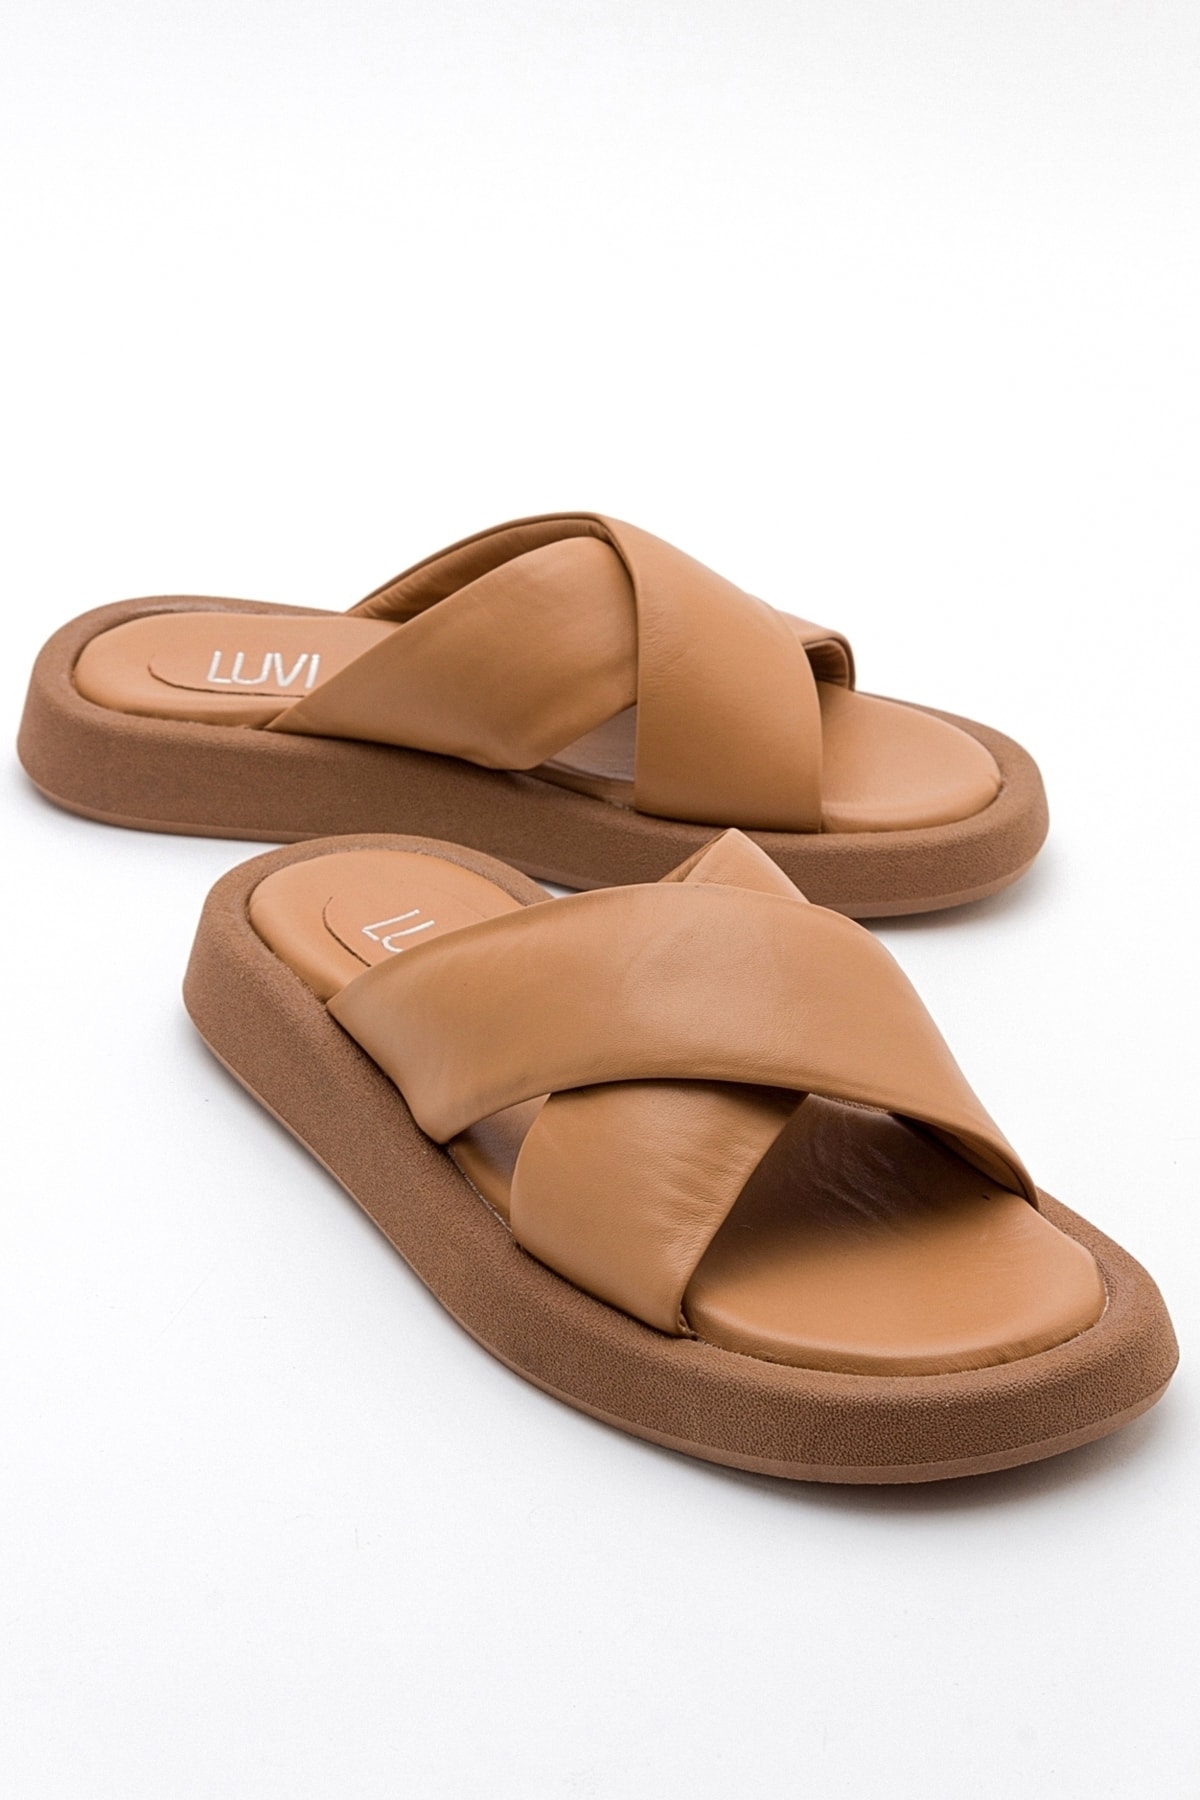 LuviShoes VOLAJO Women's Slippers With Glazed Genuine Leather Cross-Band